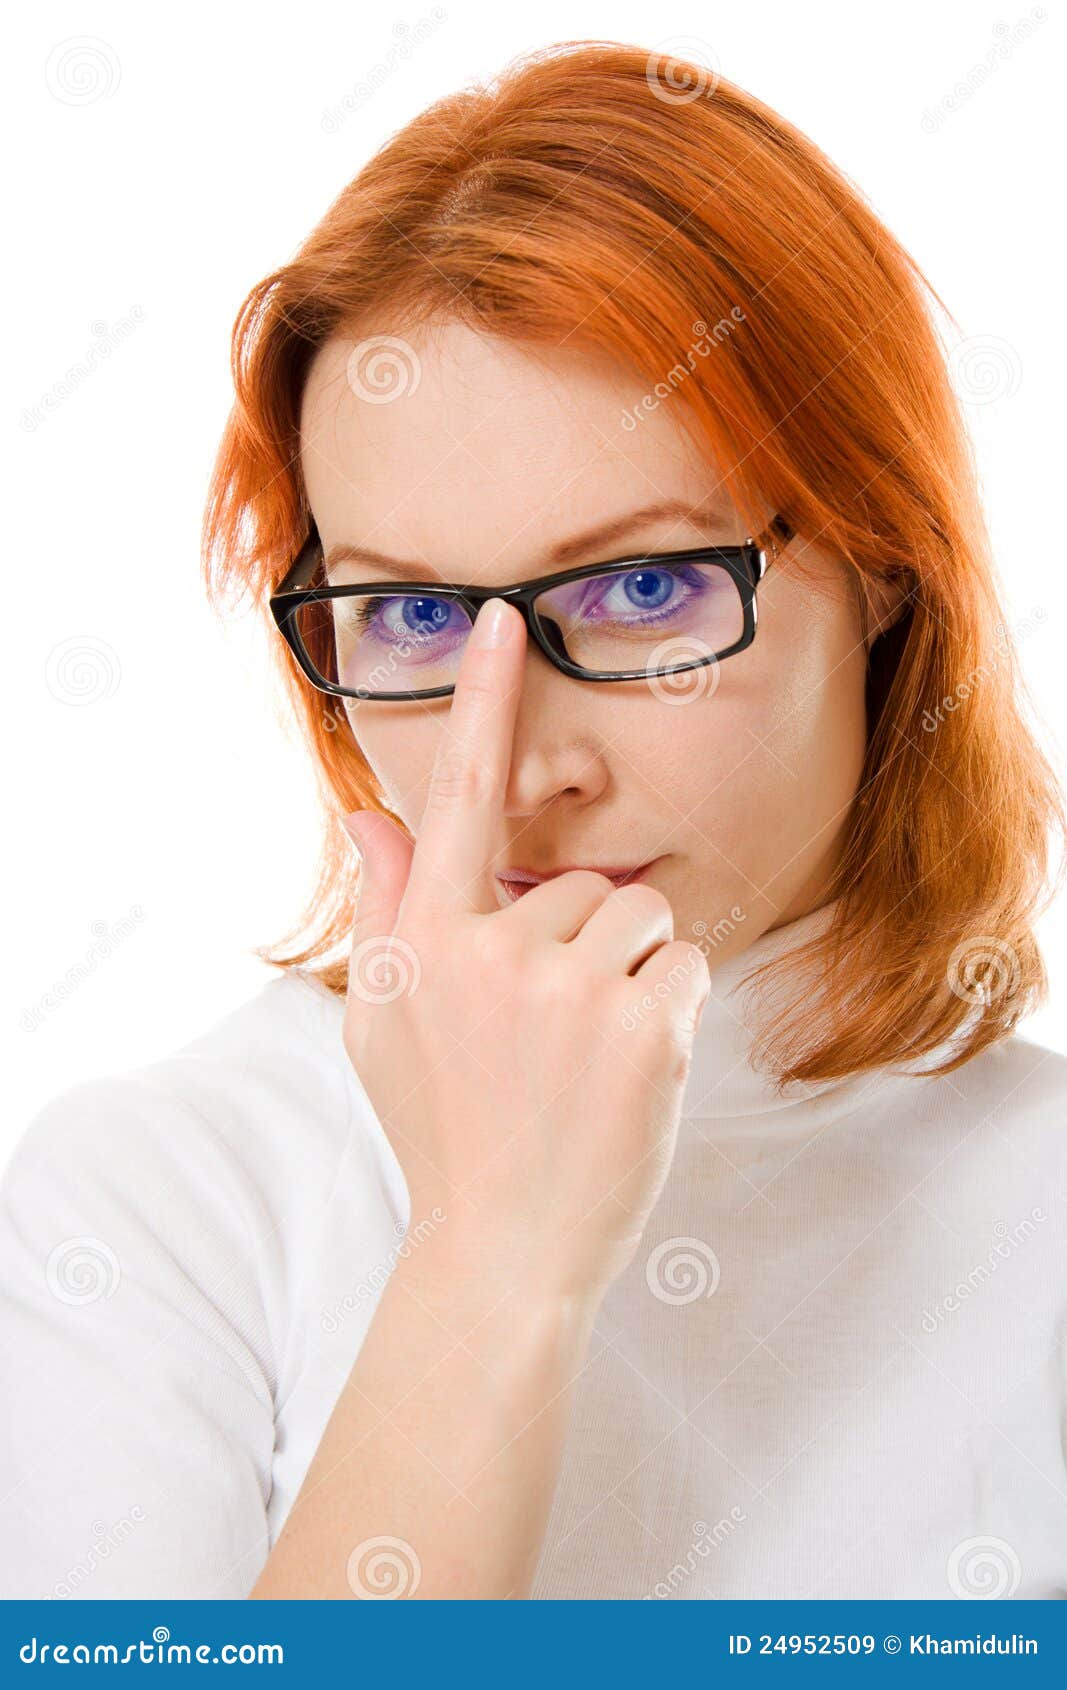 Beautiful Girl With Red Hair Wearing Glasses Stock Image